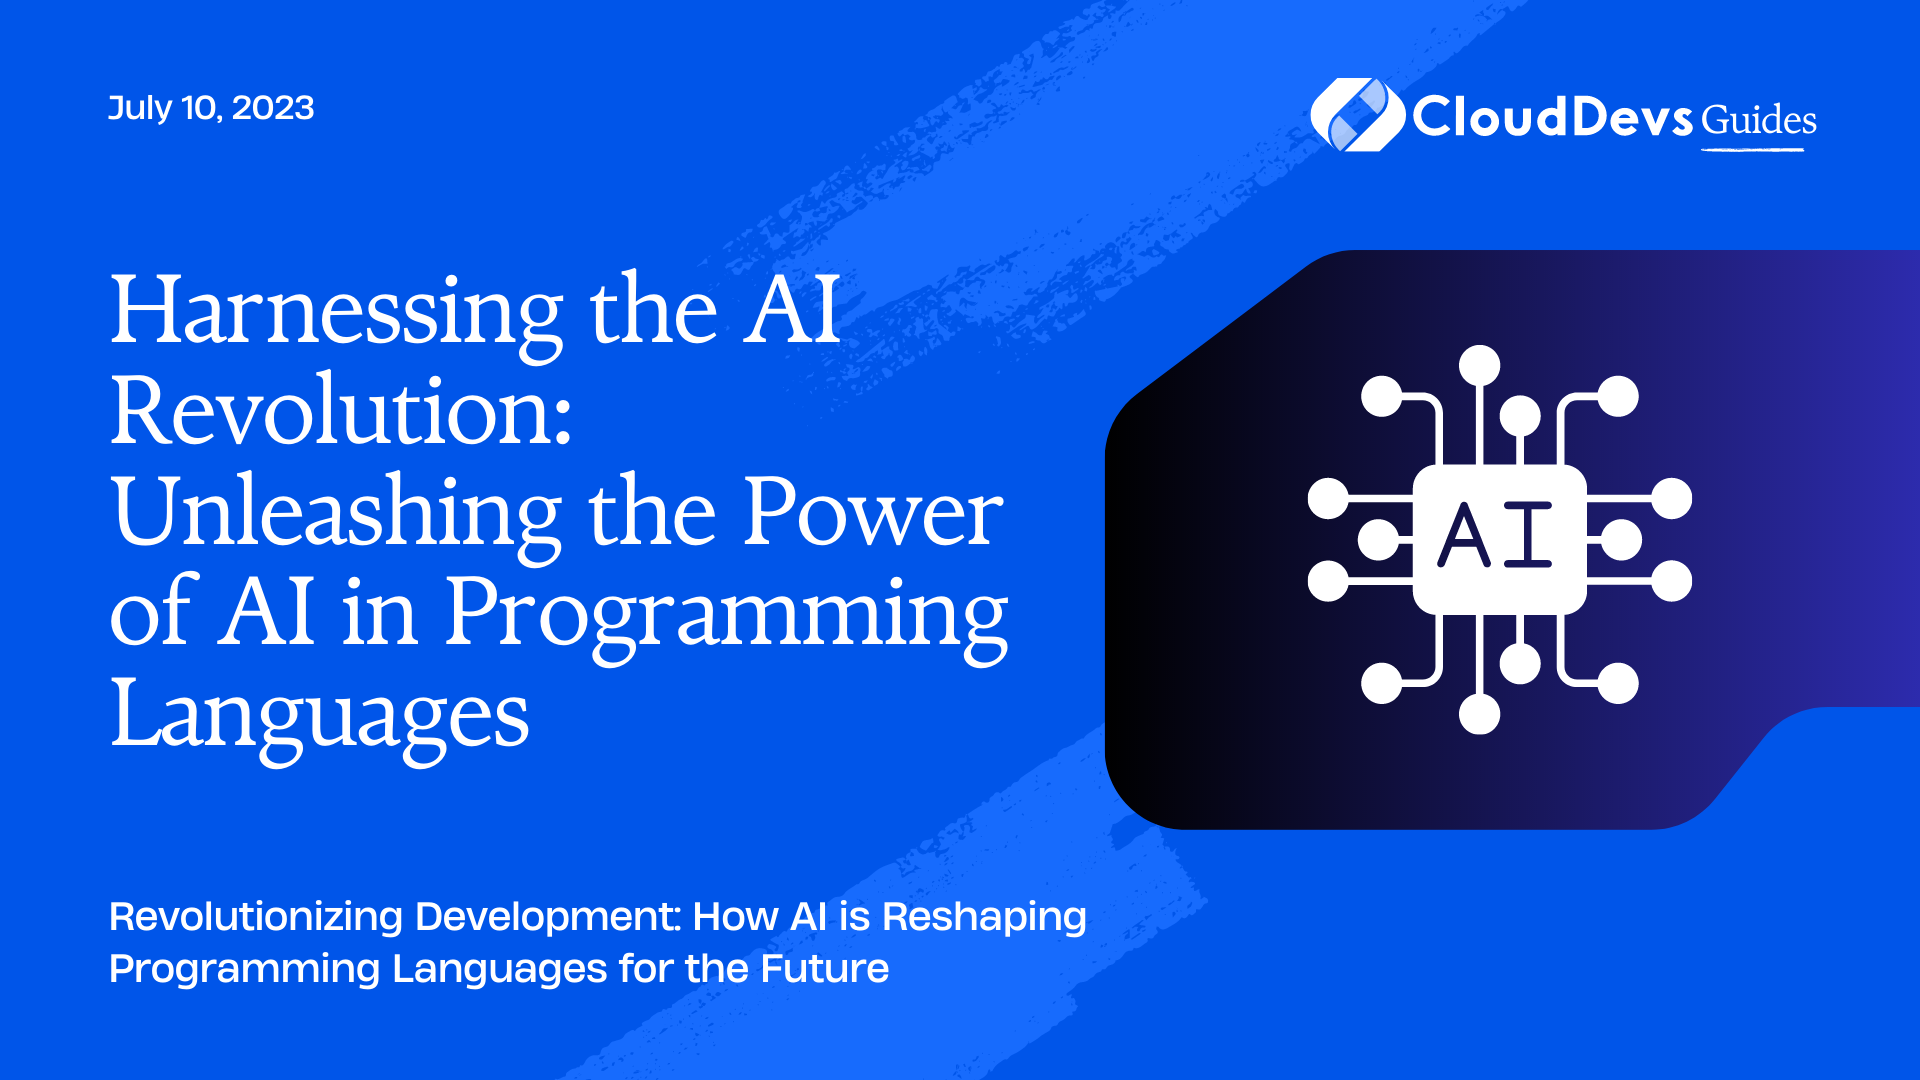 Harnessing the AI Revolution: Unleashing the Power of AI in Programming Languages